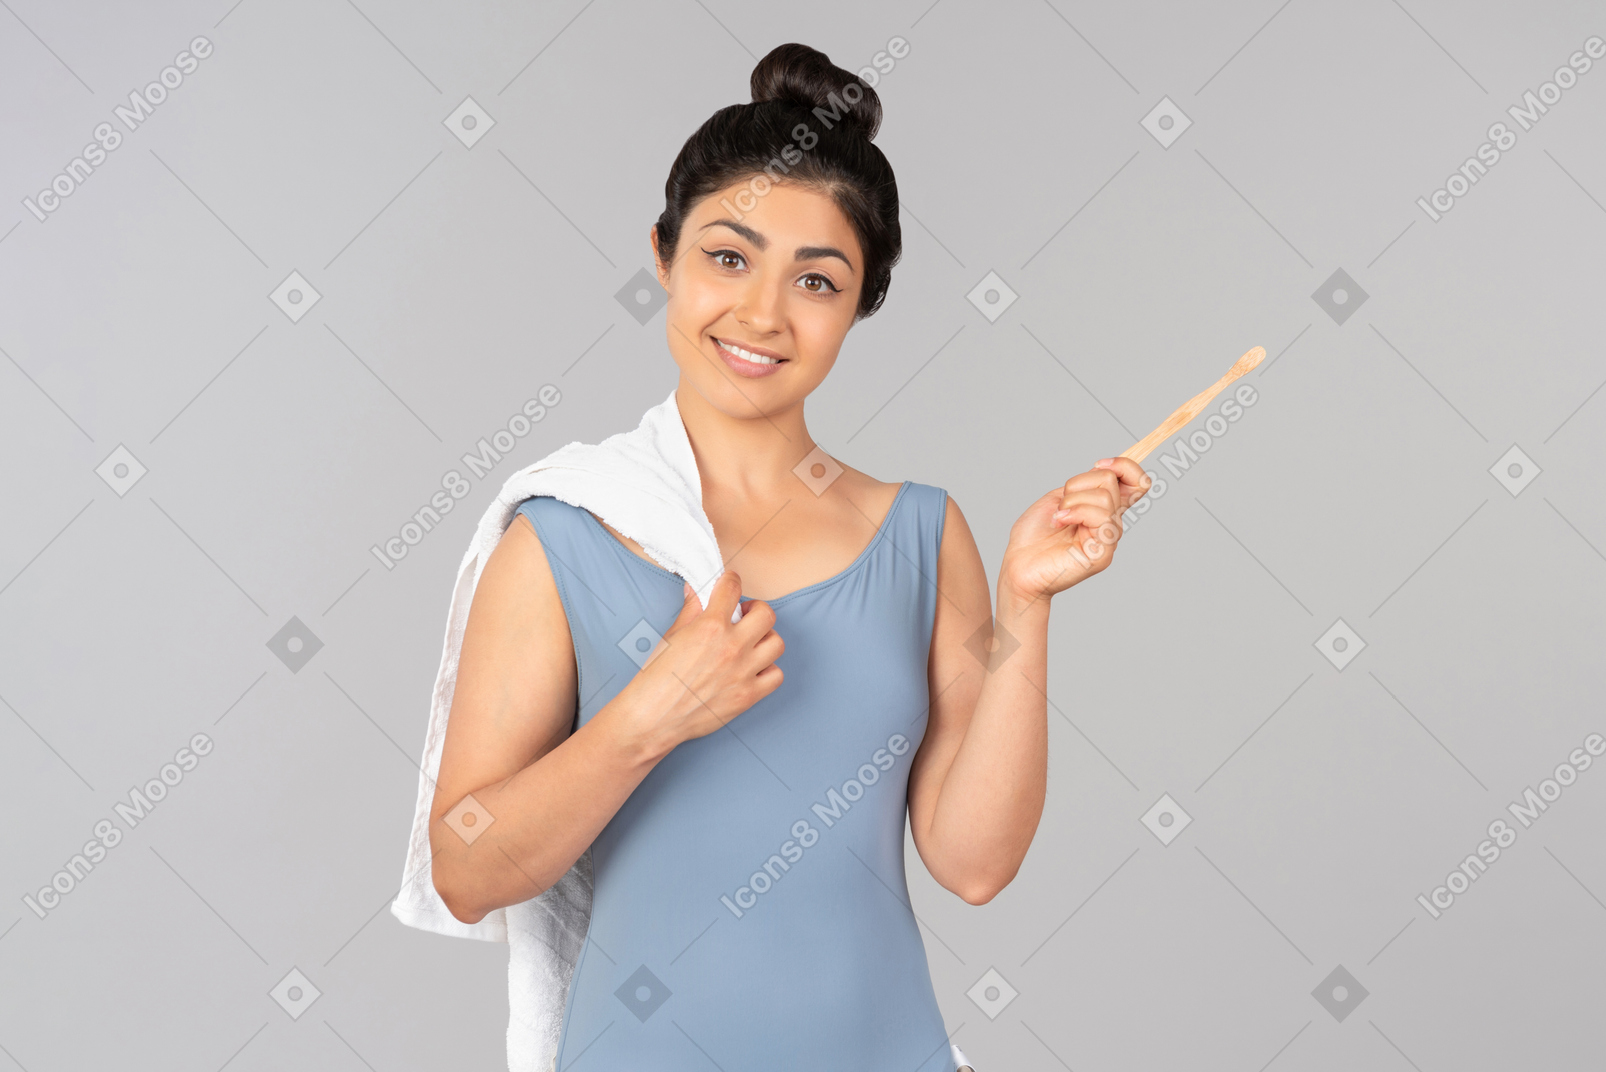 Young indian woman holding white towel and tooth brush